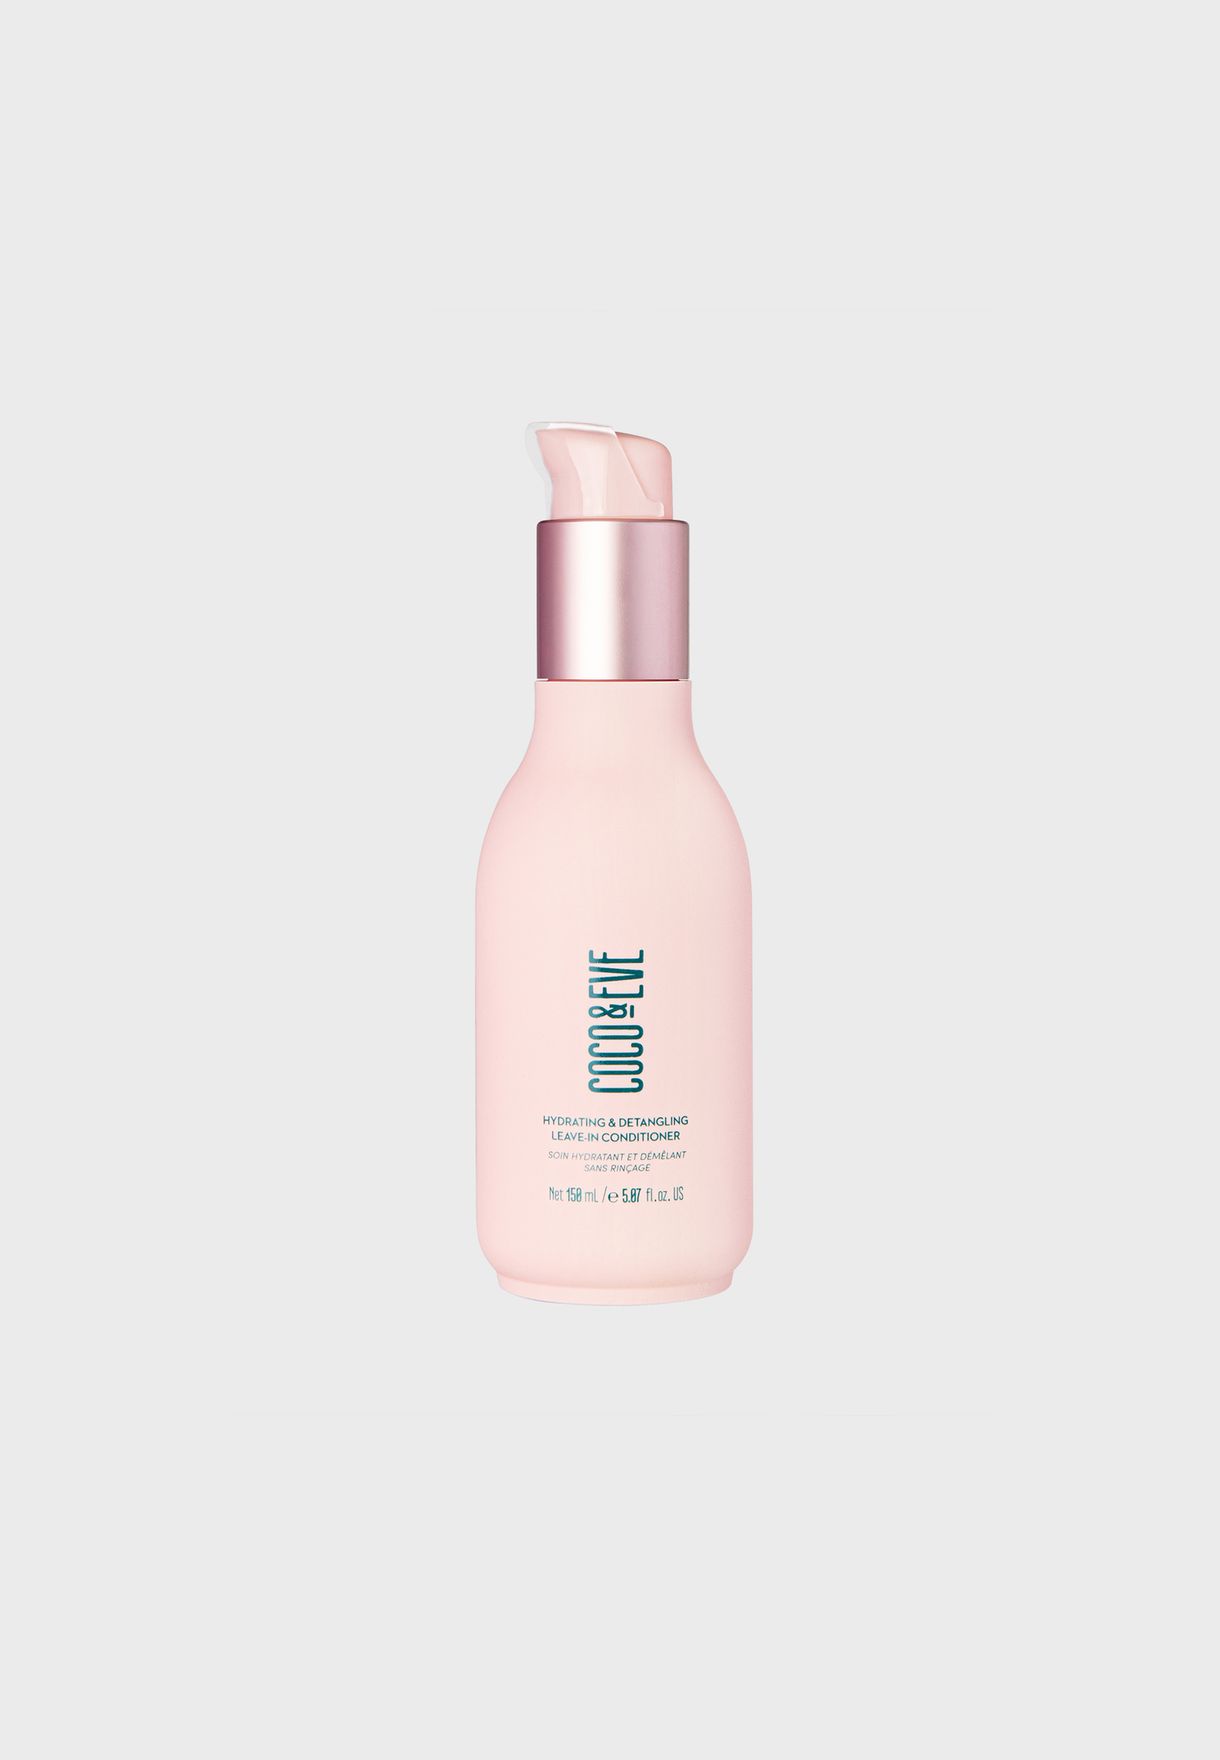 Like A Virgin Hydrating & Detangling Leave-In Conditioner